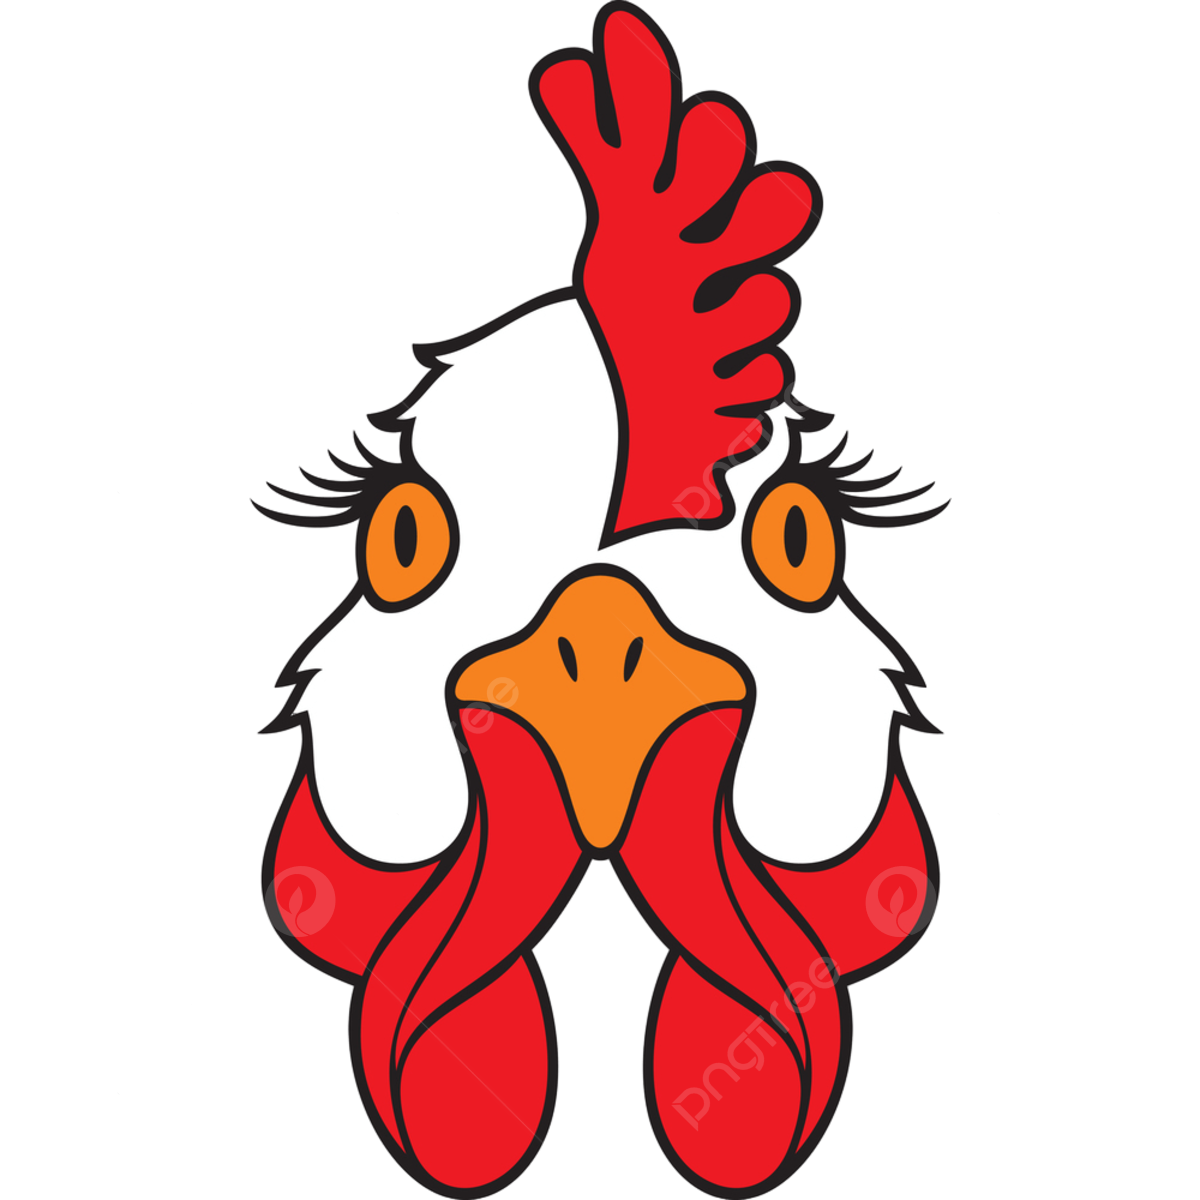 Chicken face clipart images free download png transparent background